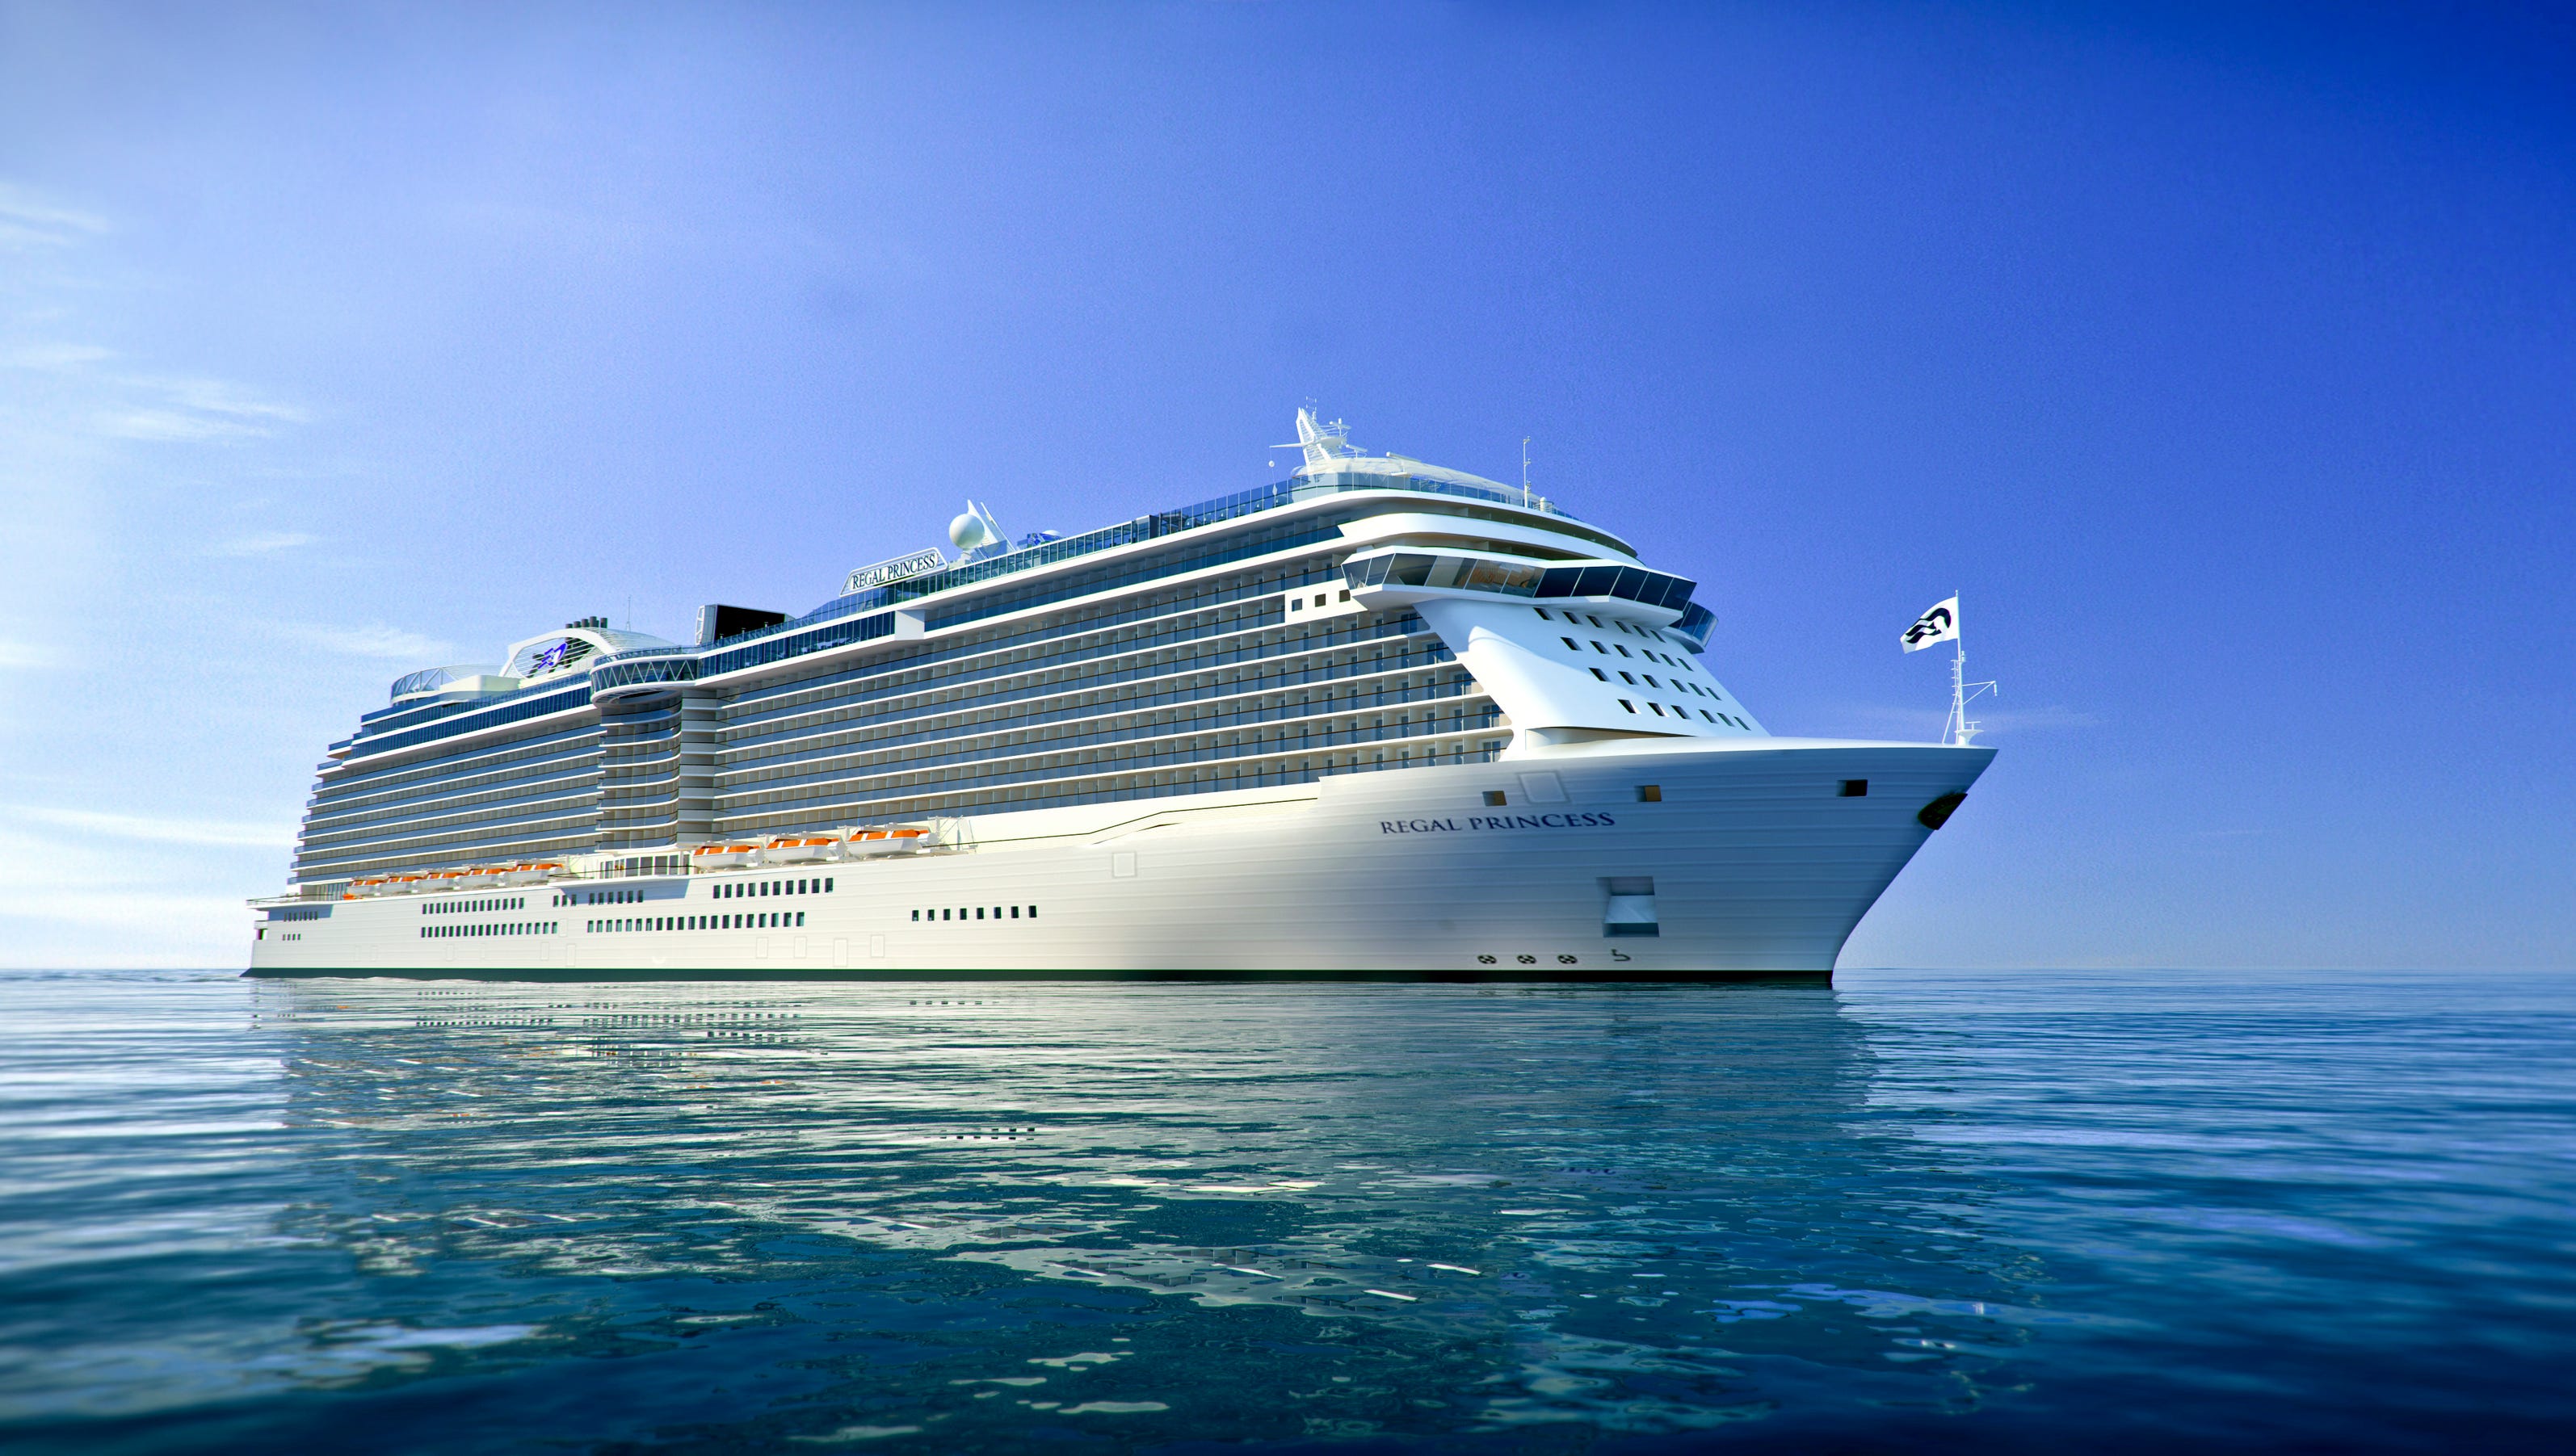 New cruise ships for 2014: Regal Princess3200 x 1800